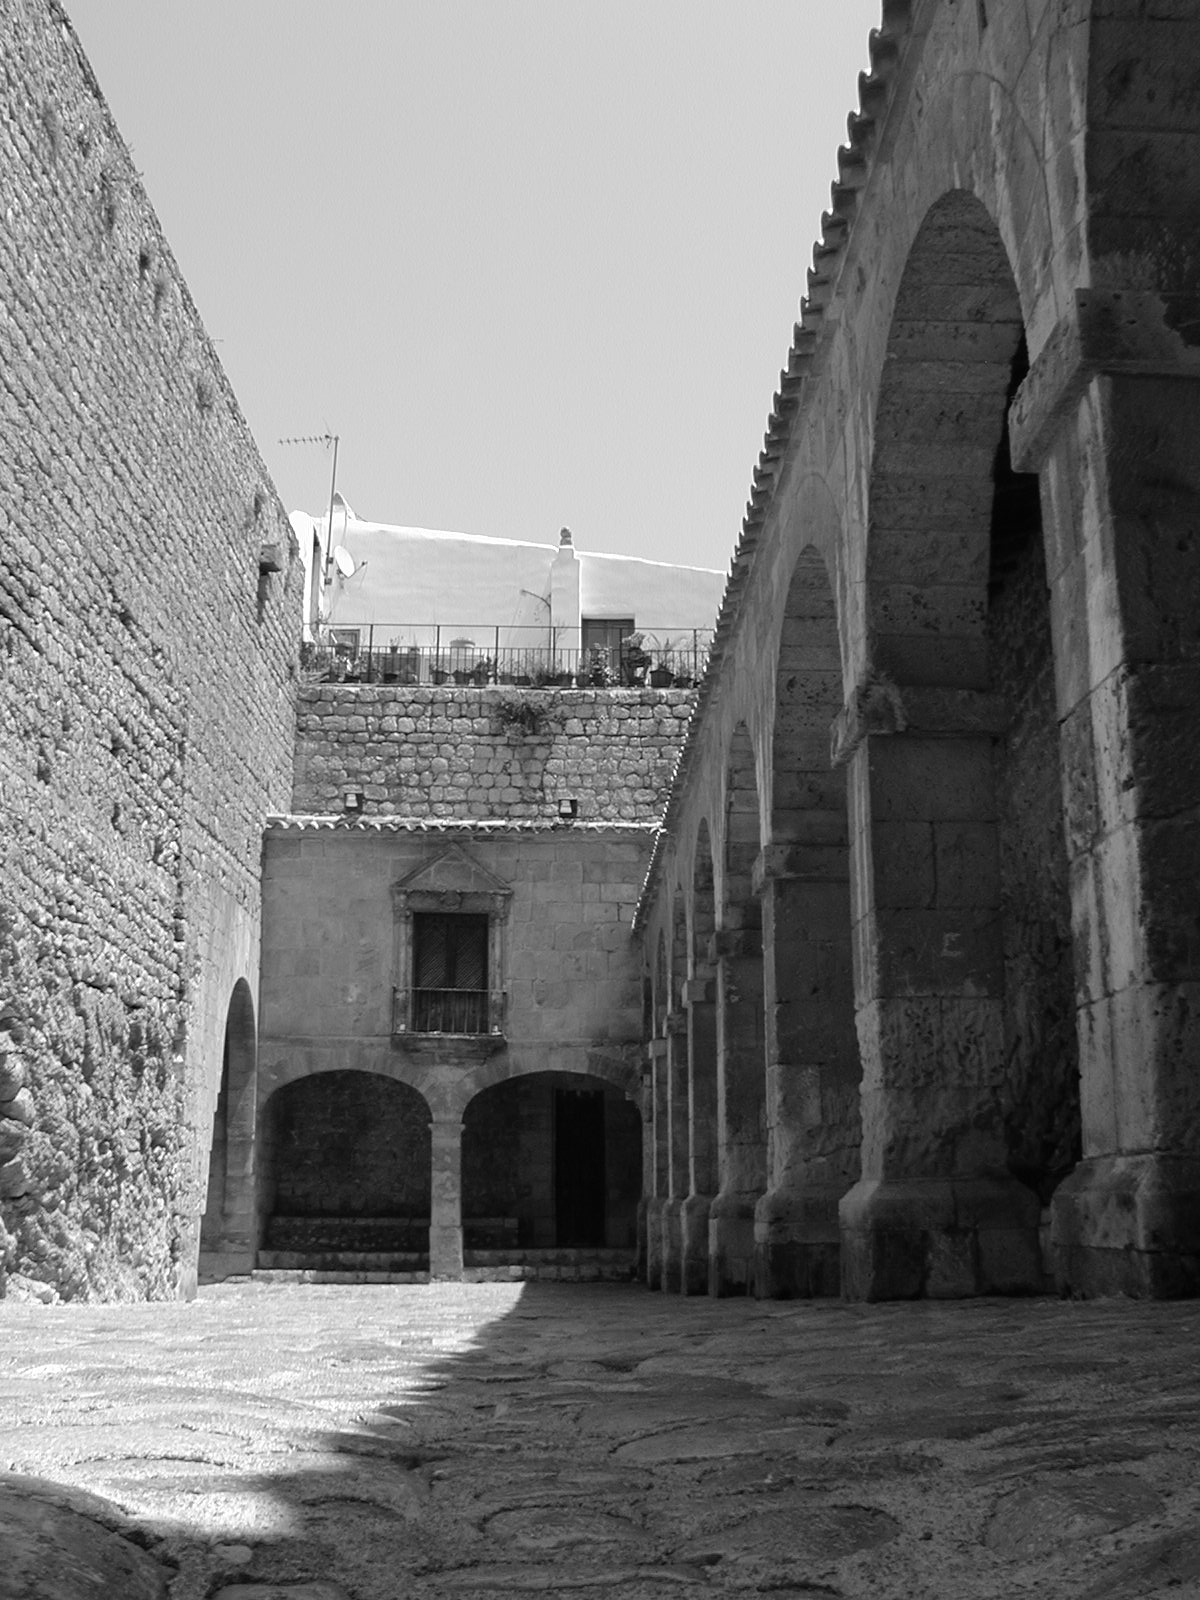 Entrance to the Old City, B&W (5/7)